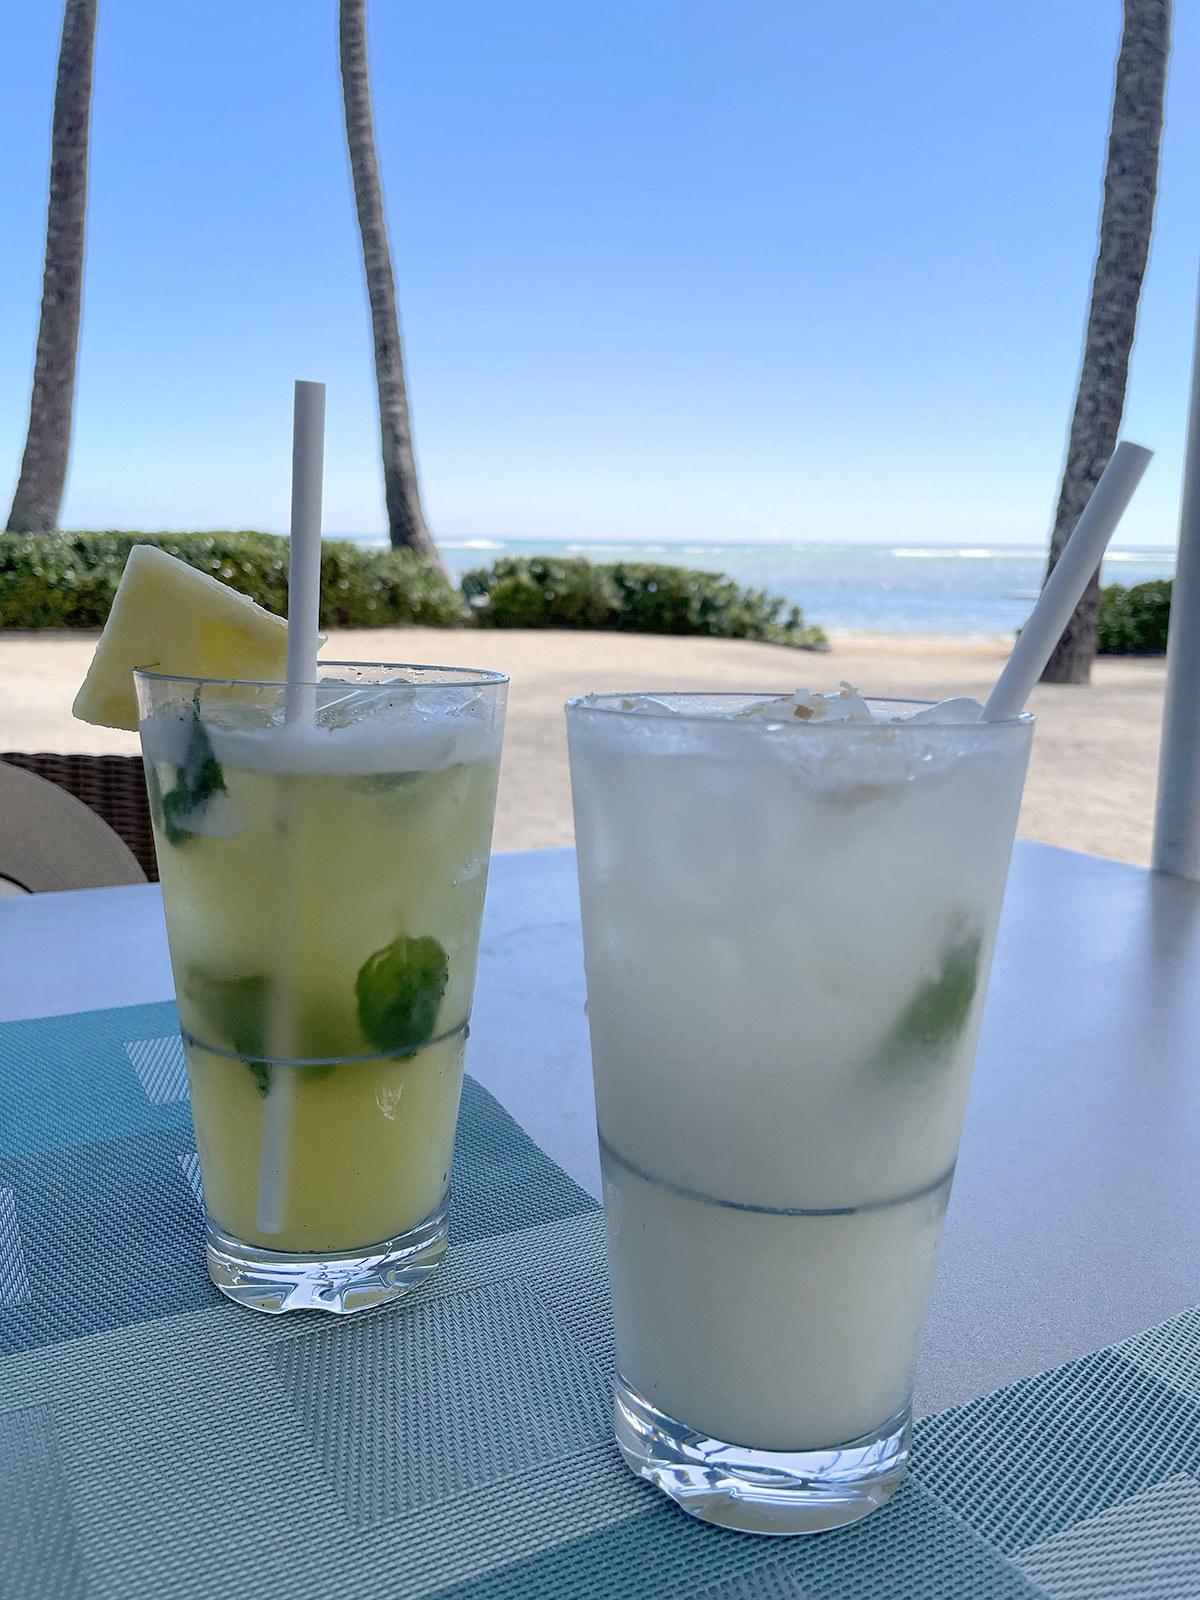 Two tropical-looking drinks on a table next to the beach